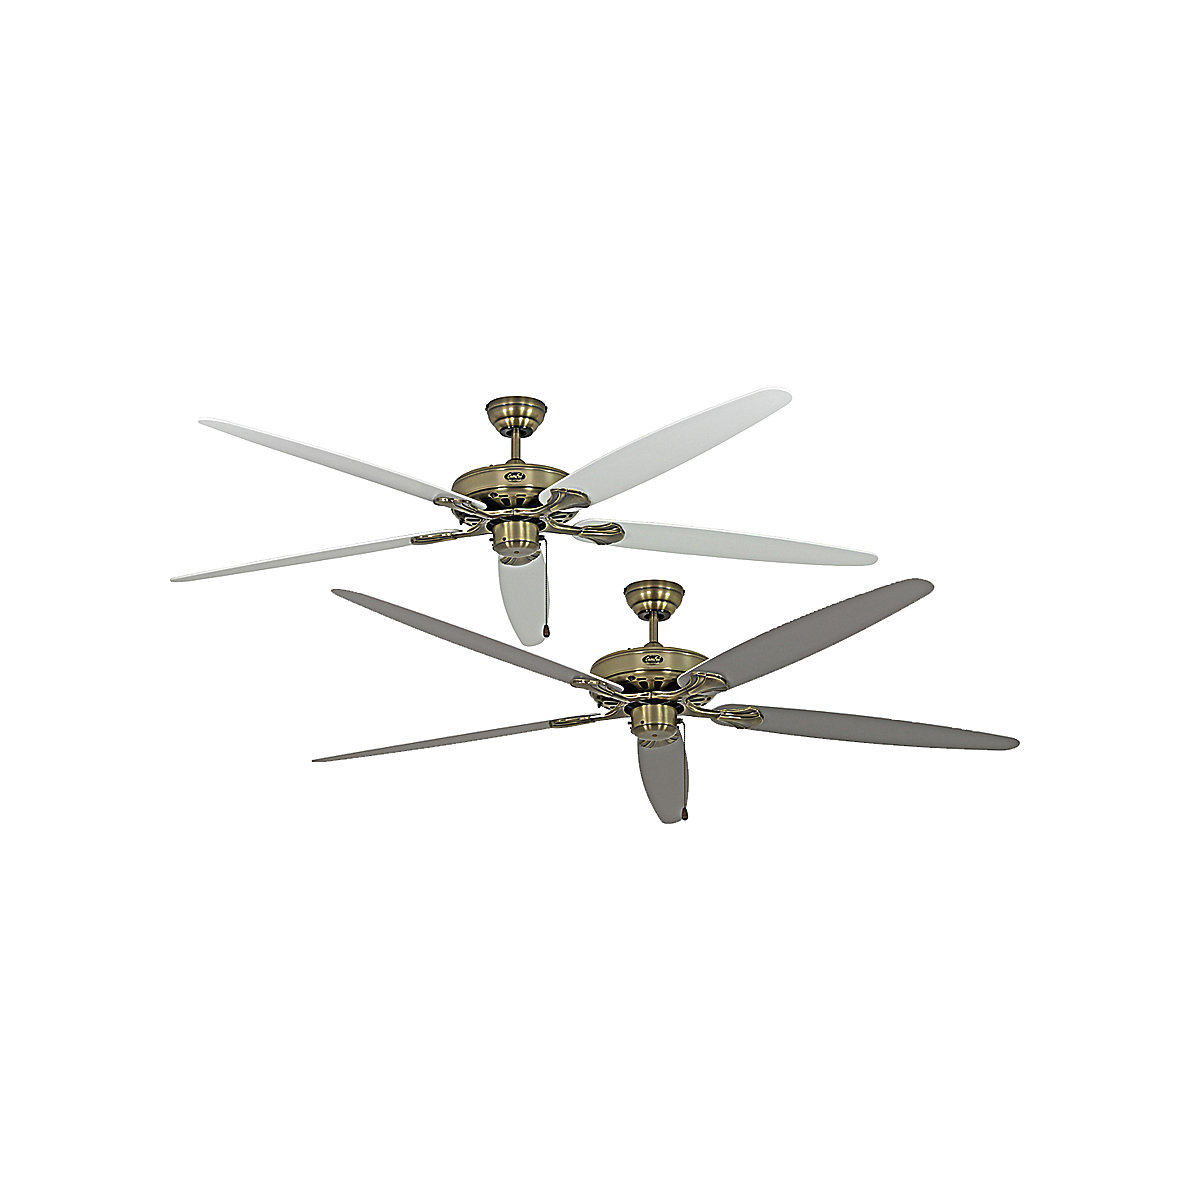 CLASSIC ROYAL ceiling fan, rotor blade Ø 1800 mm, painted white / painted light grey / antique brass-10